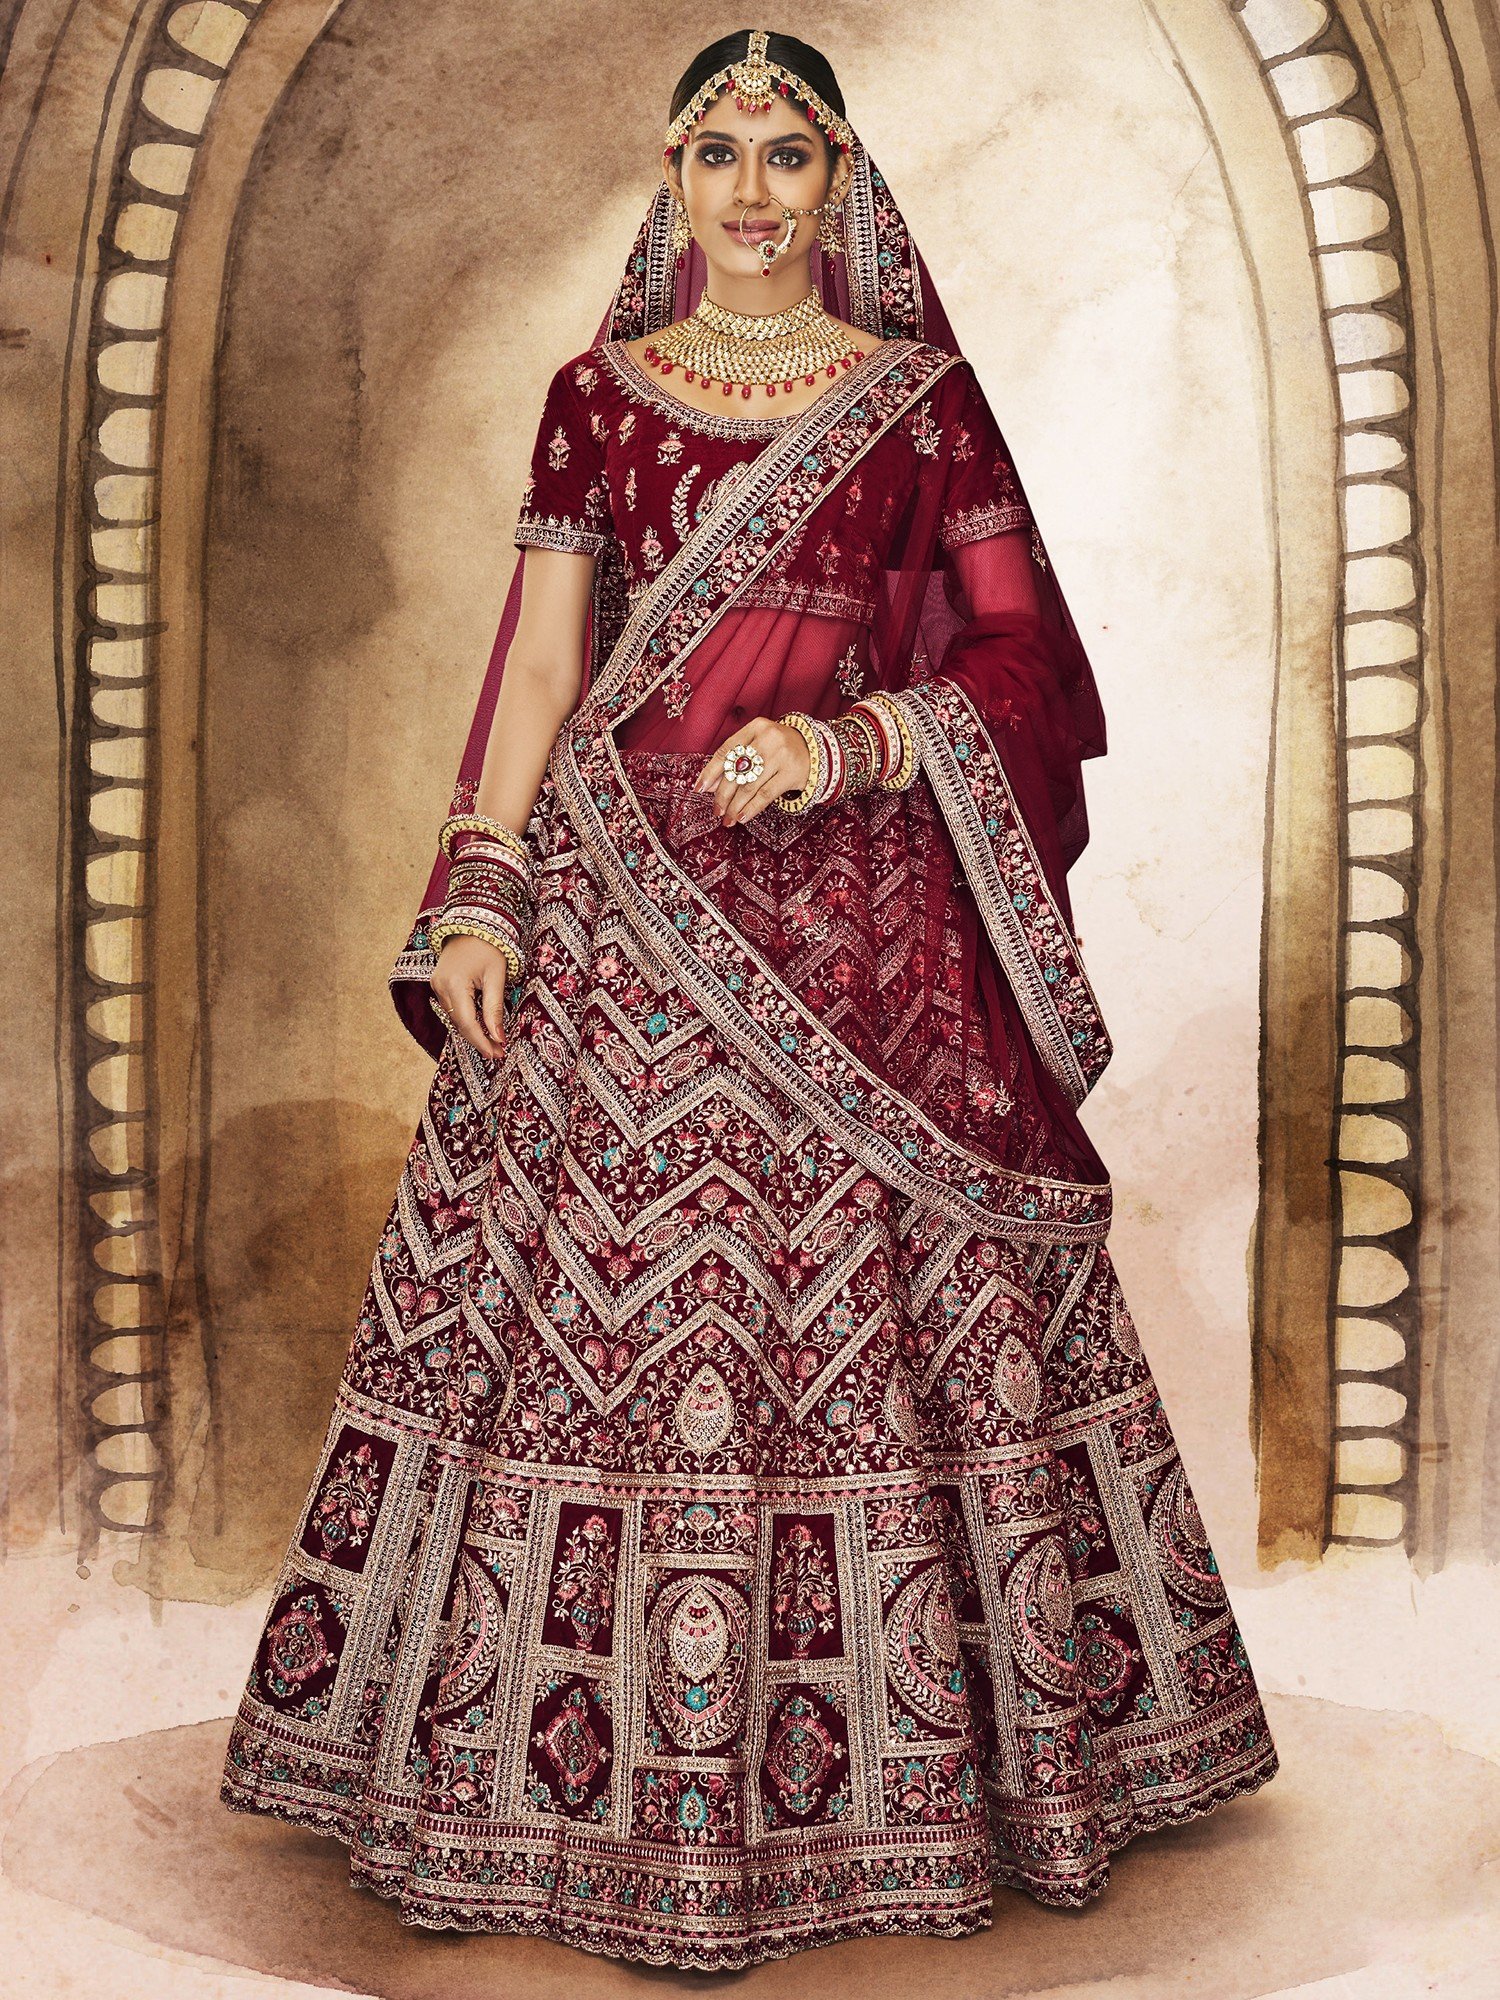 How To Match Your Bridal Jewellery With Lehenga? | Traditional Wedding